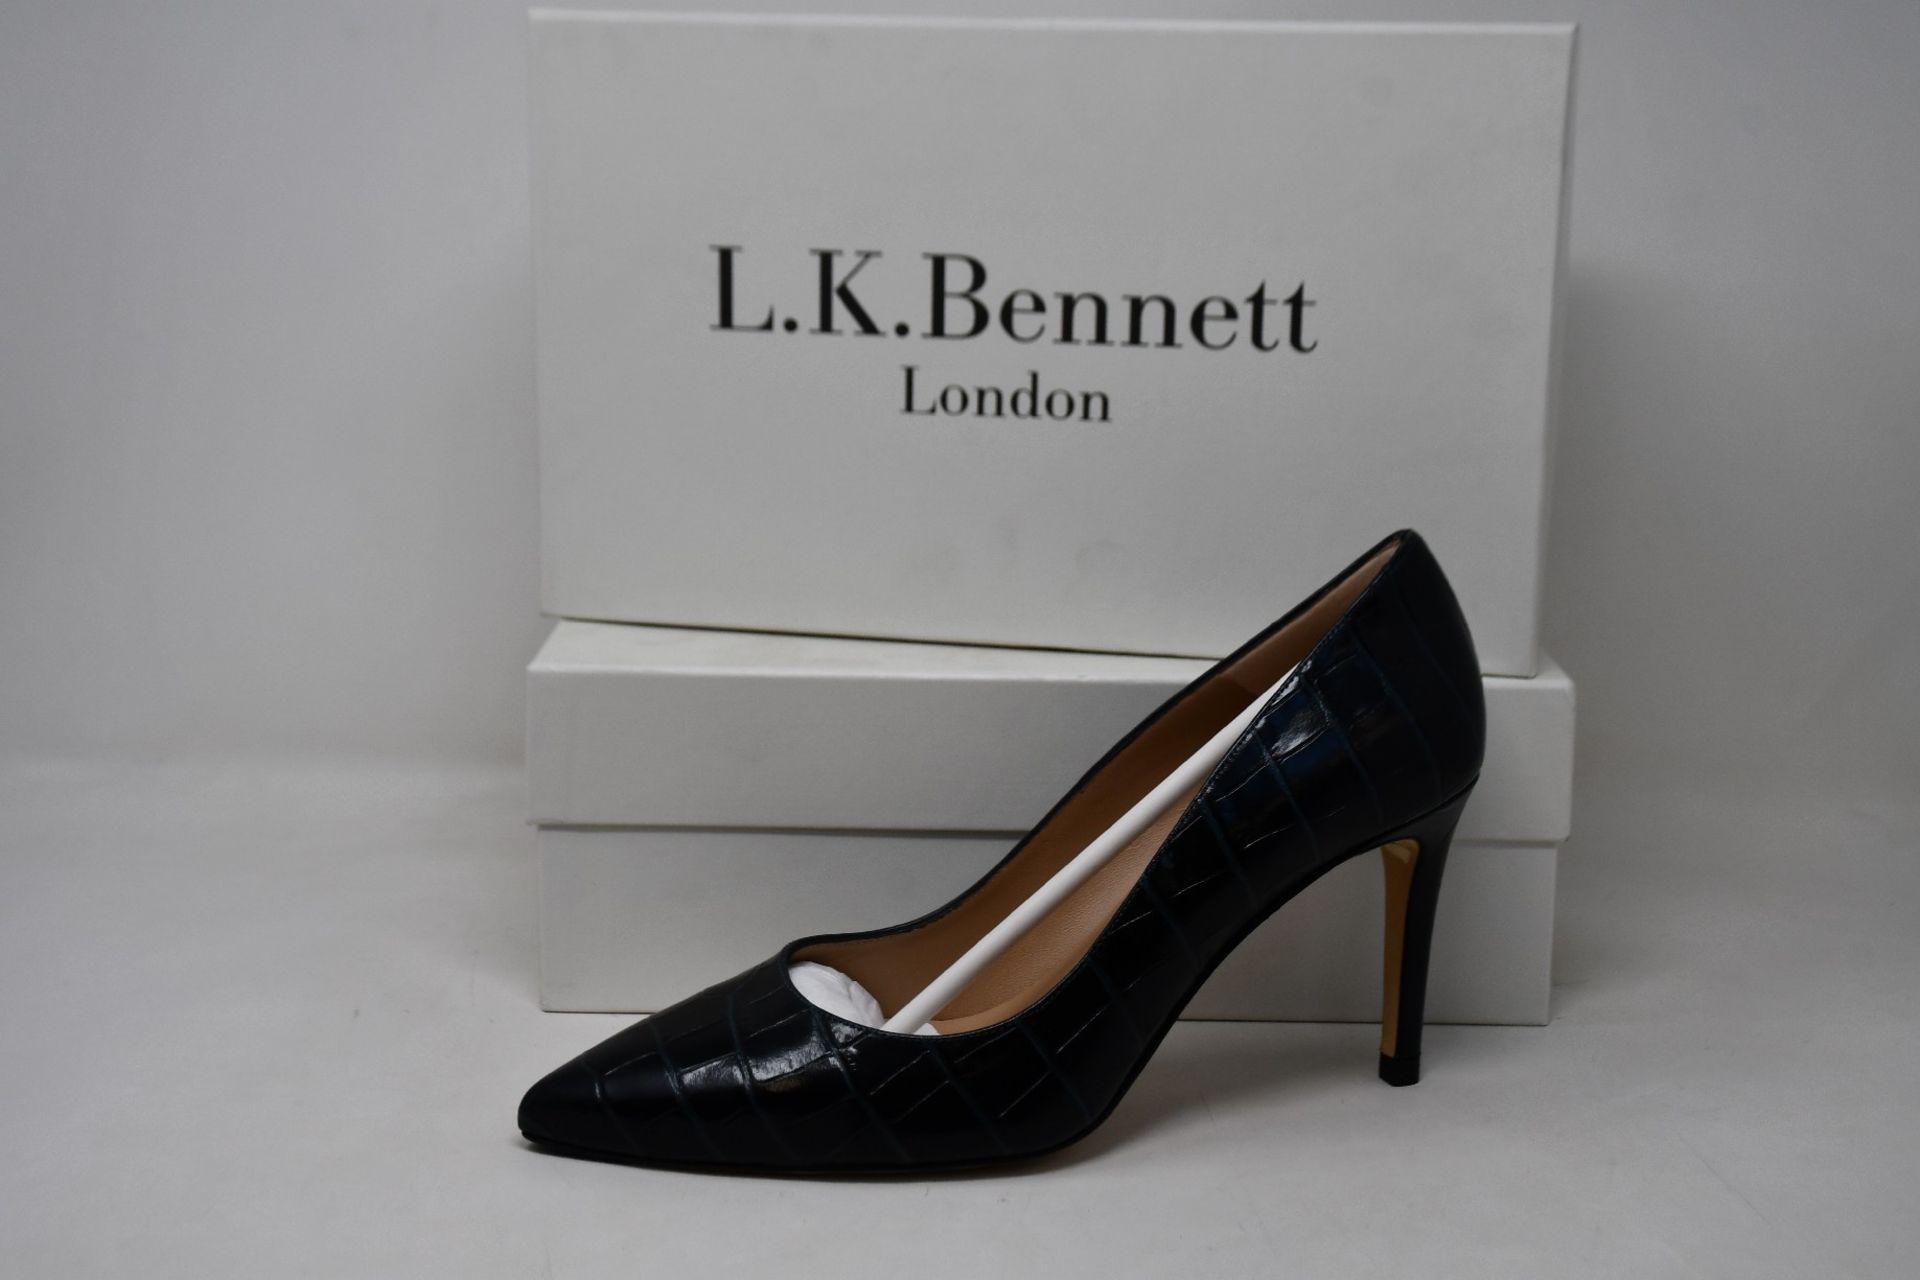 Two pairs of as new L.K.Bennett Floret shoes in teal croc effect (EU 37 - RRP £229).